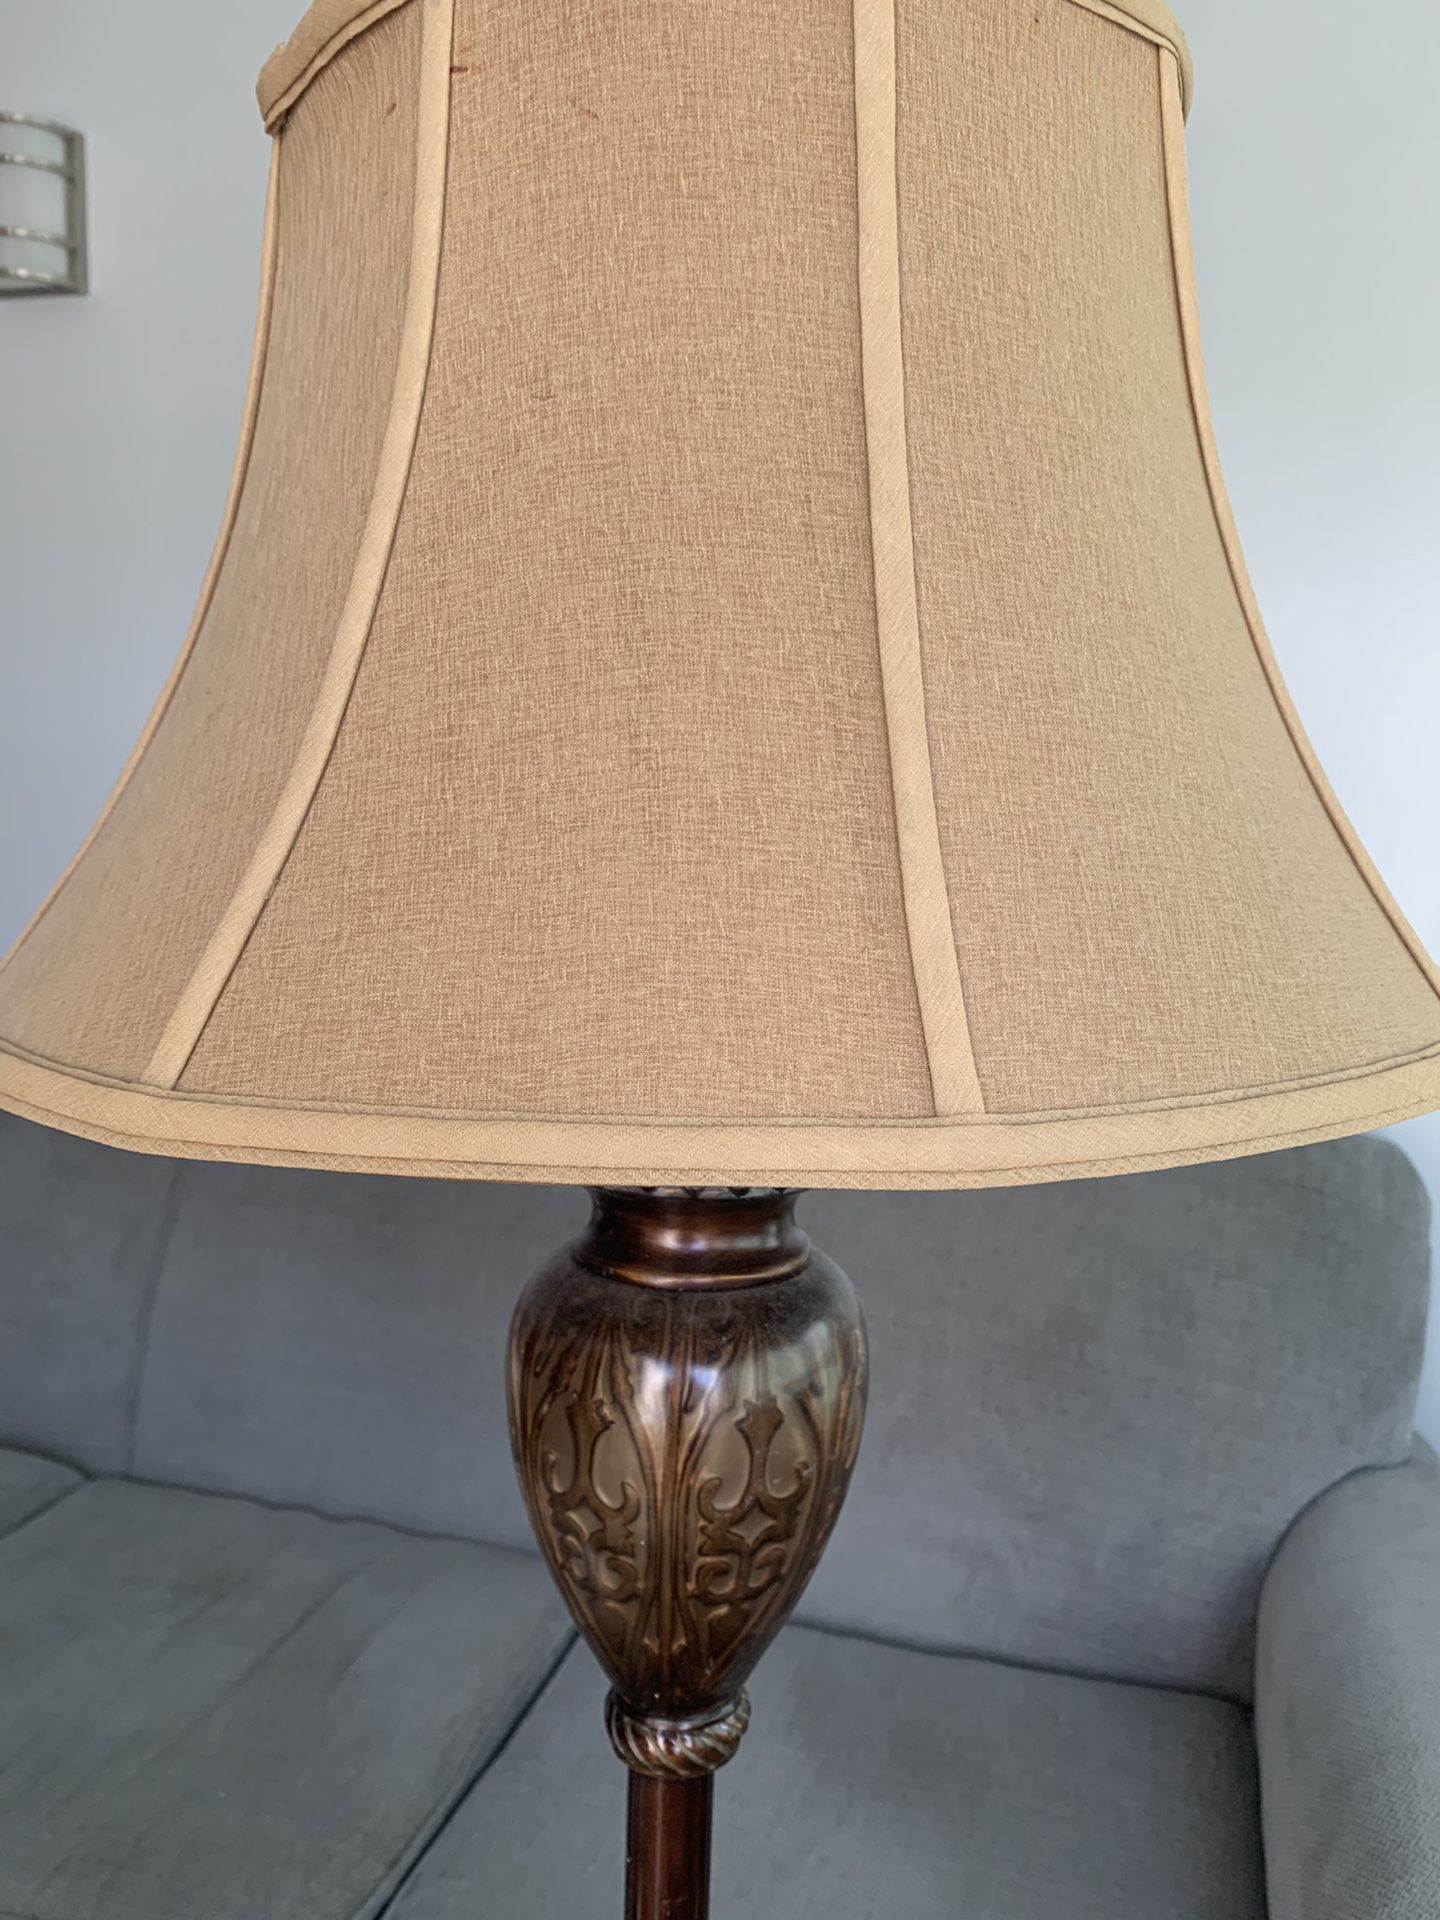 Beautiful floor lamp about 5 ft tall. Available if listed